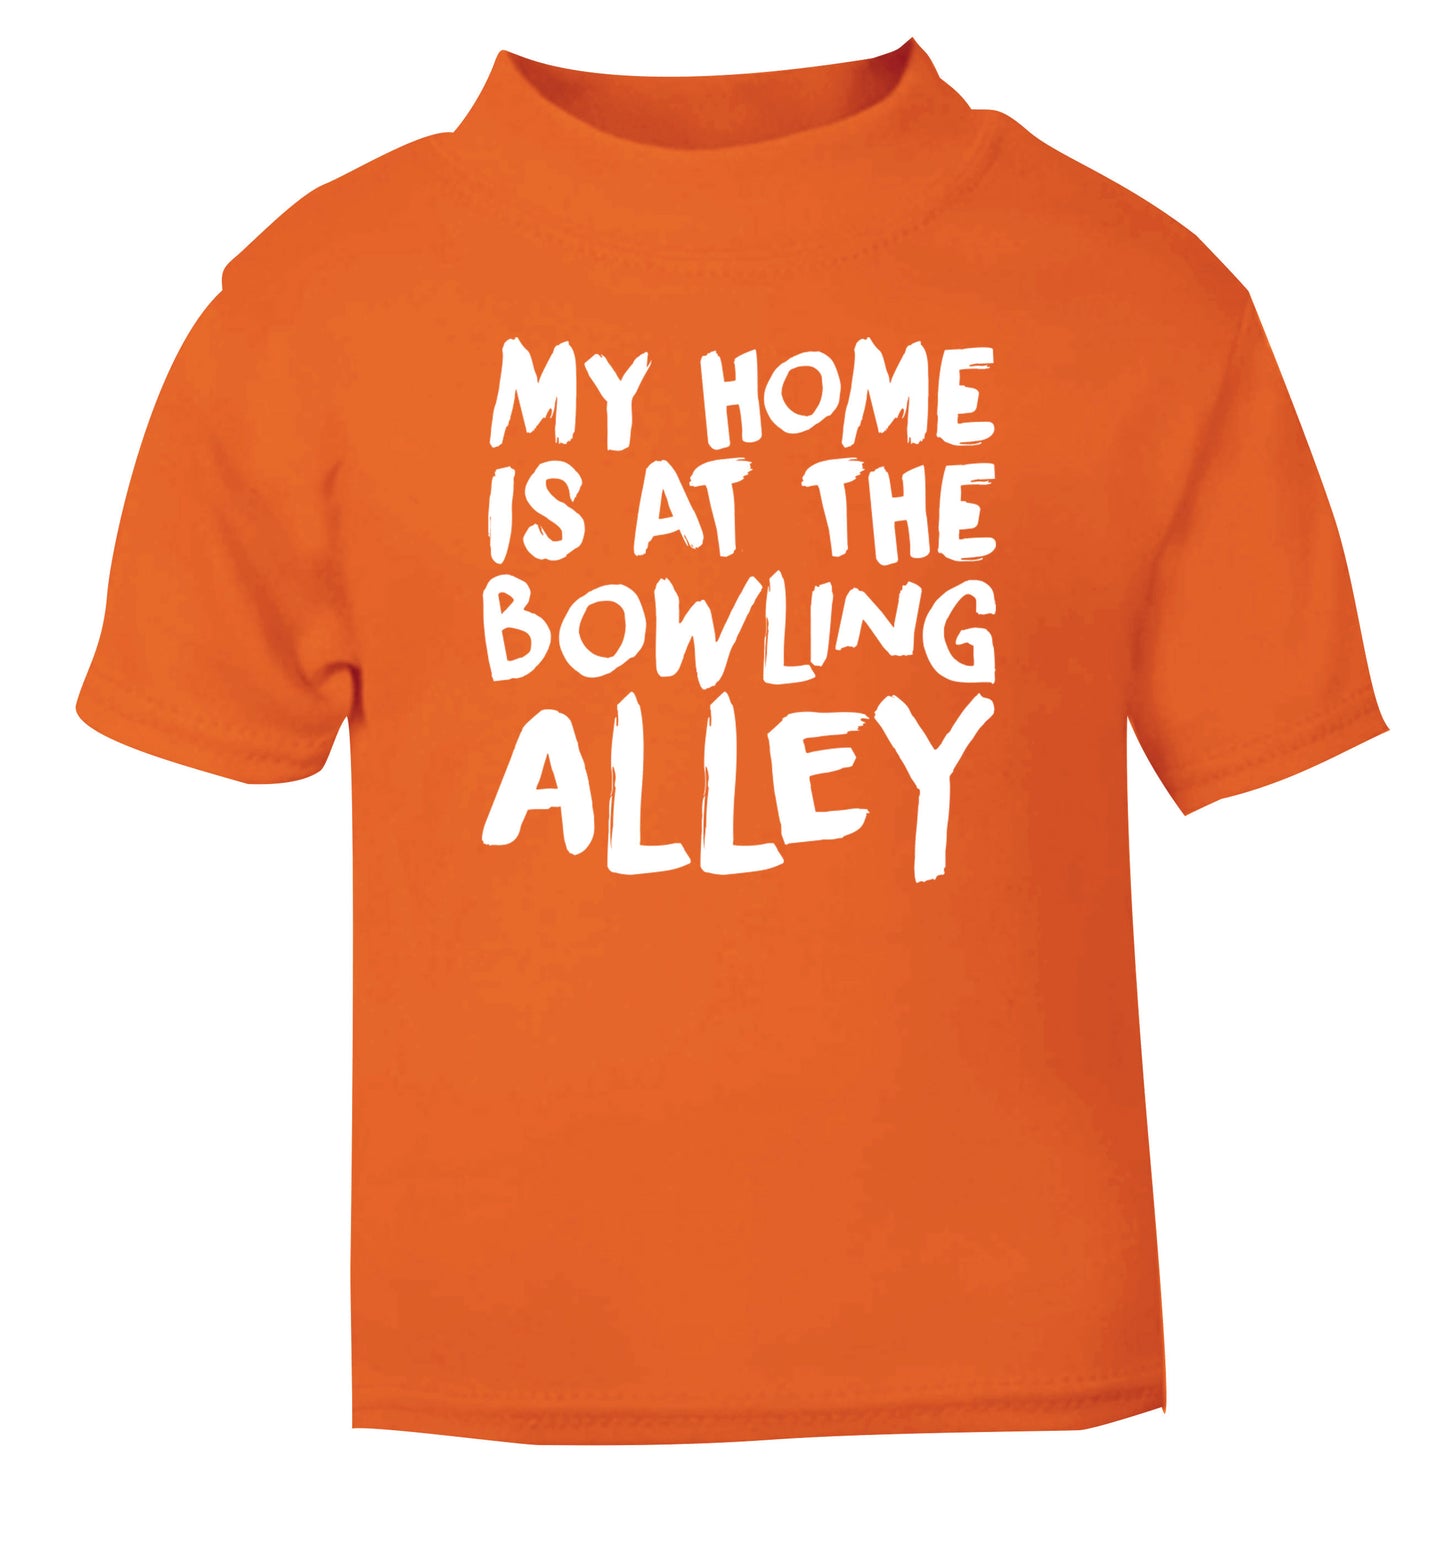 My home is at the bowling alley orange Baby Toddler Tshirt 2 Years